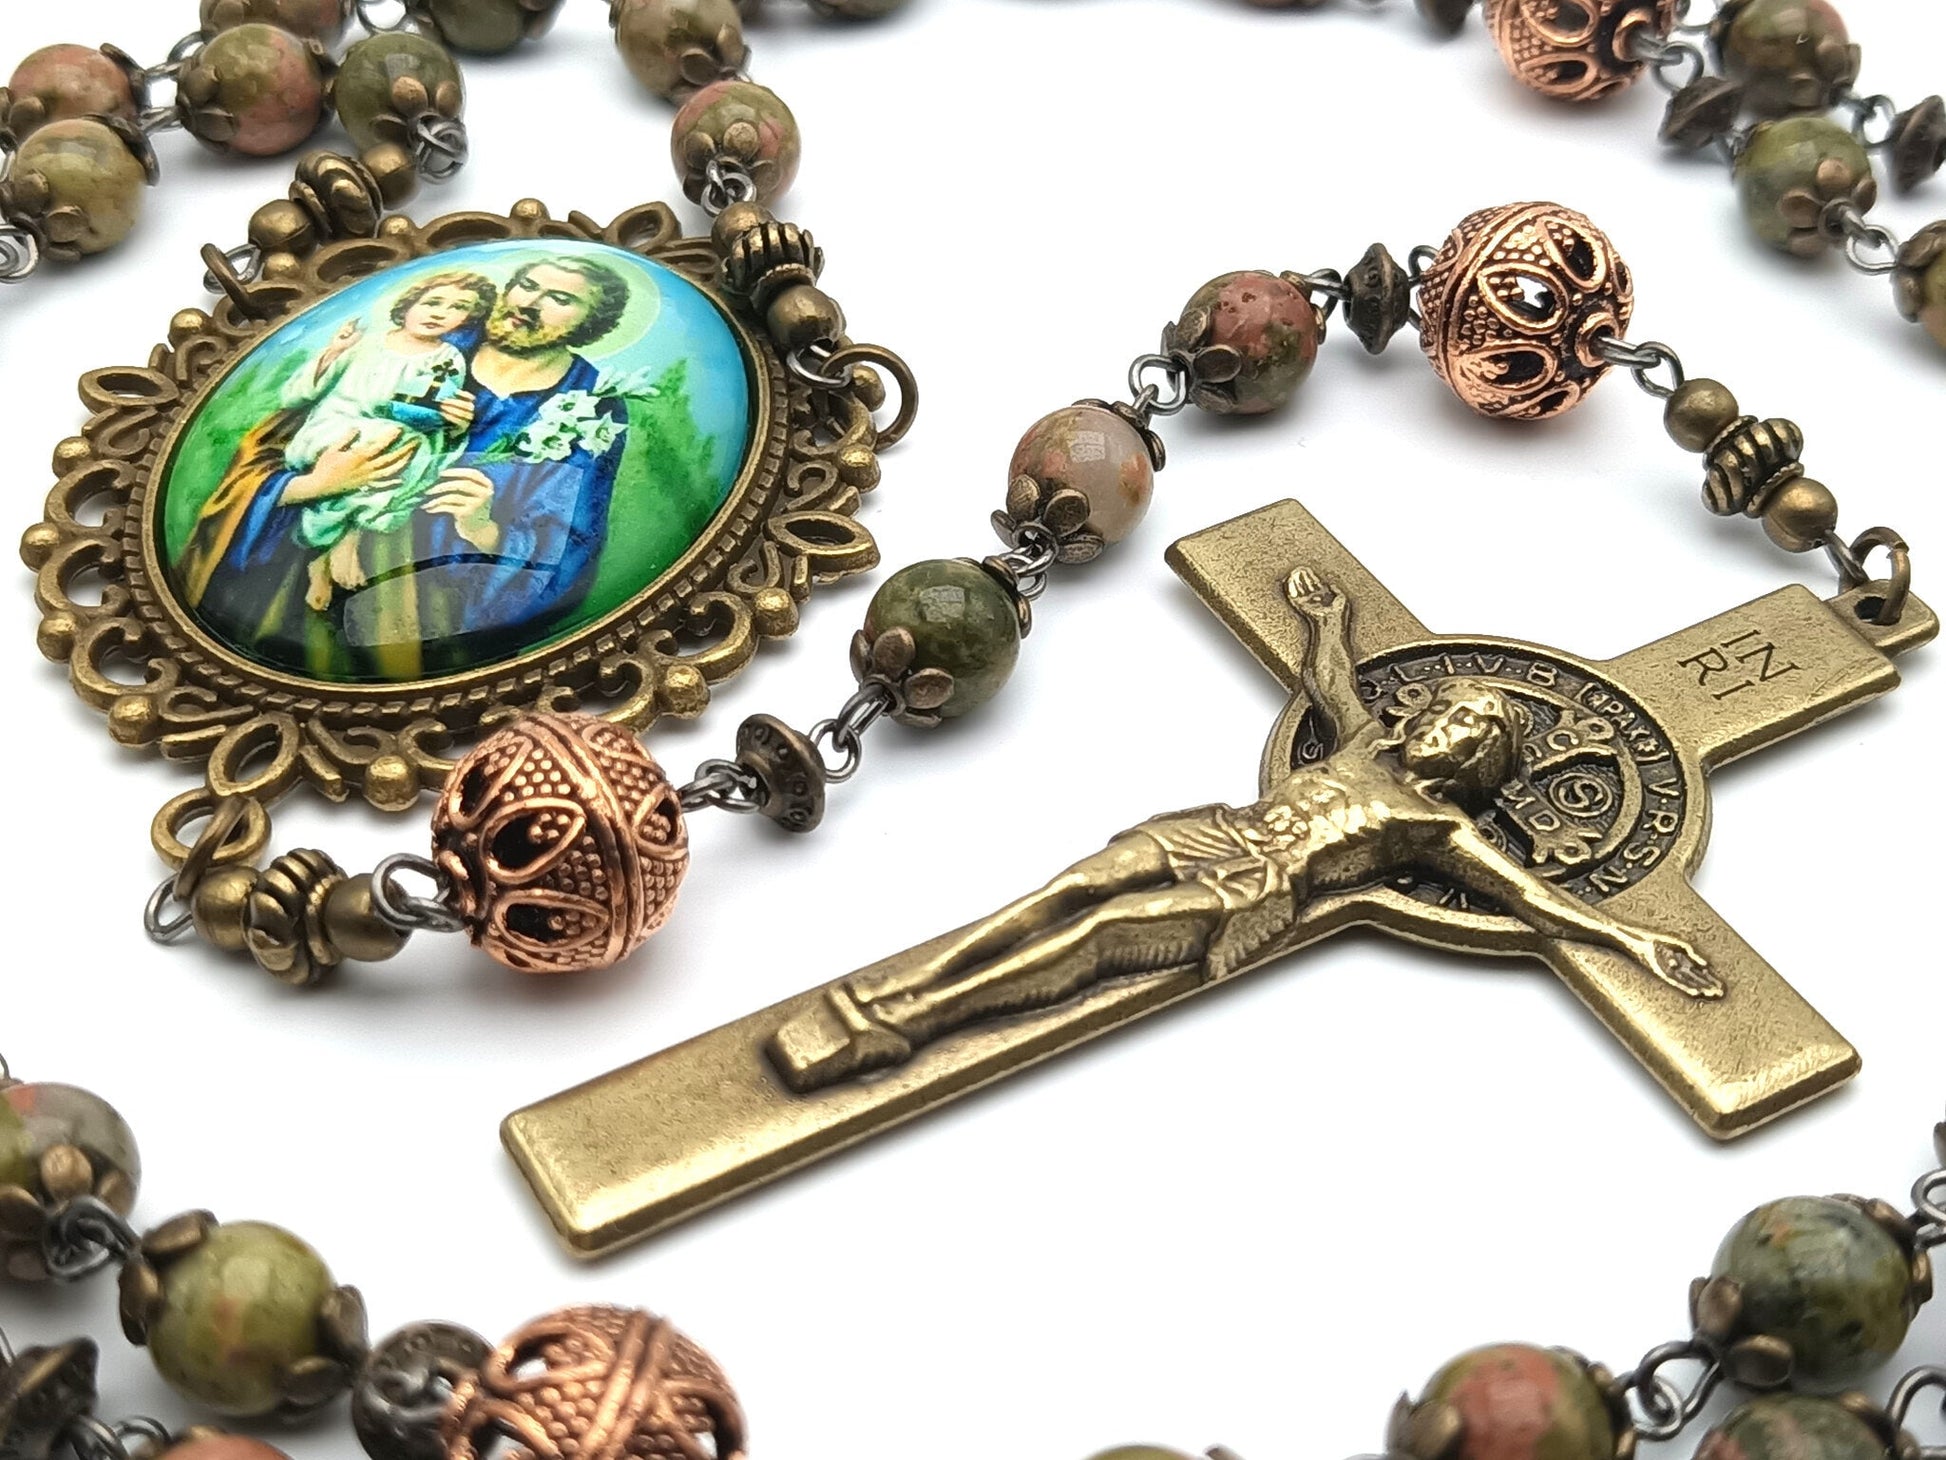 Saint Joseph unique rosary beads with green gemstone beads, bronze bead caps, copper pater beads, brass Saint Benedict crucifix and picture centre medal.